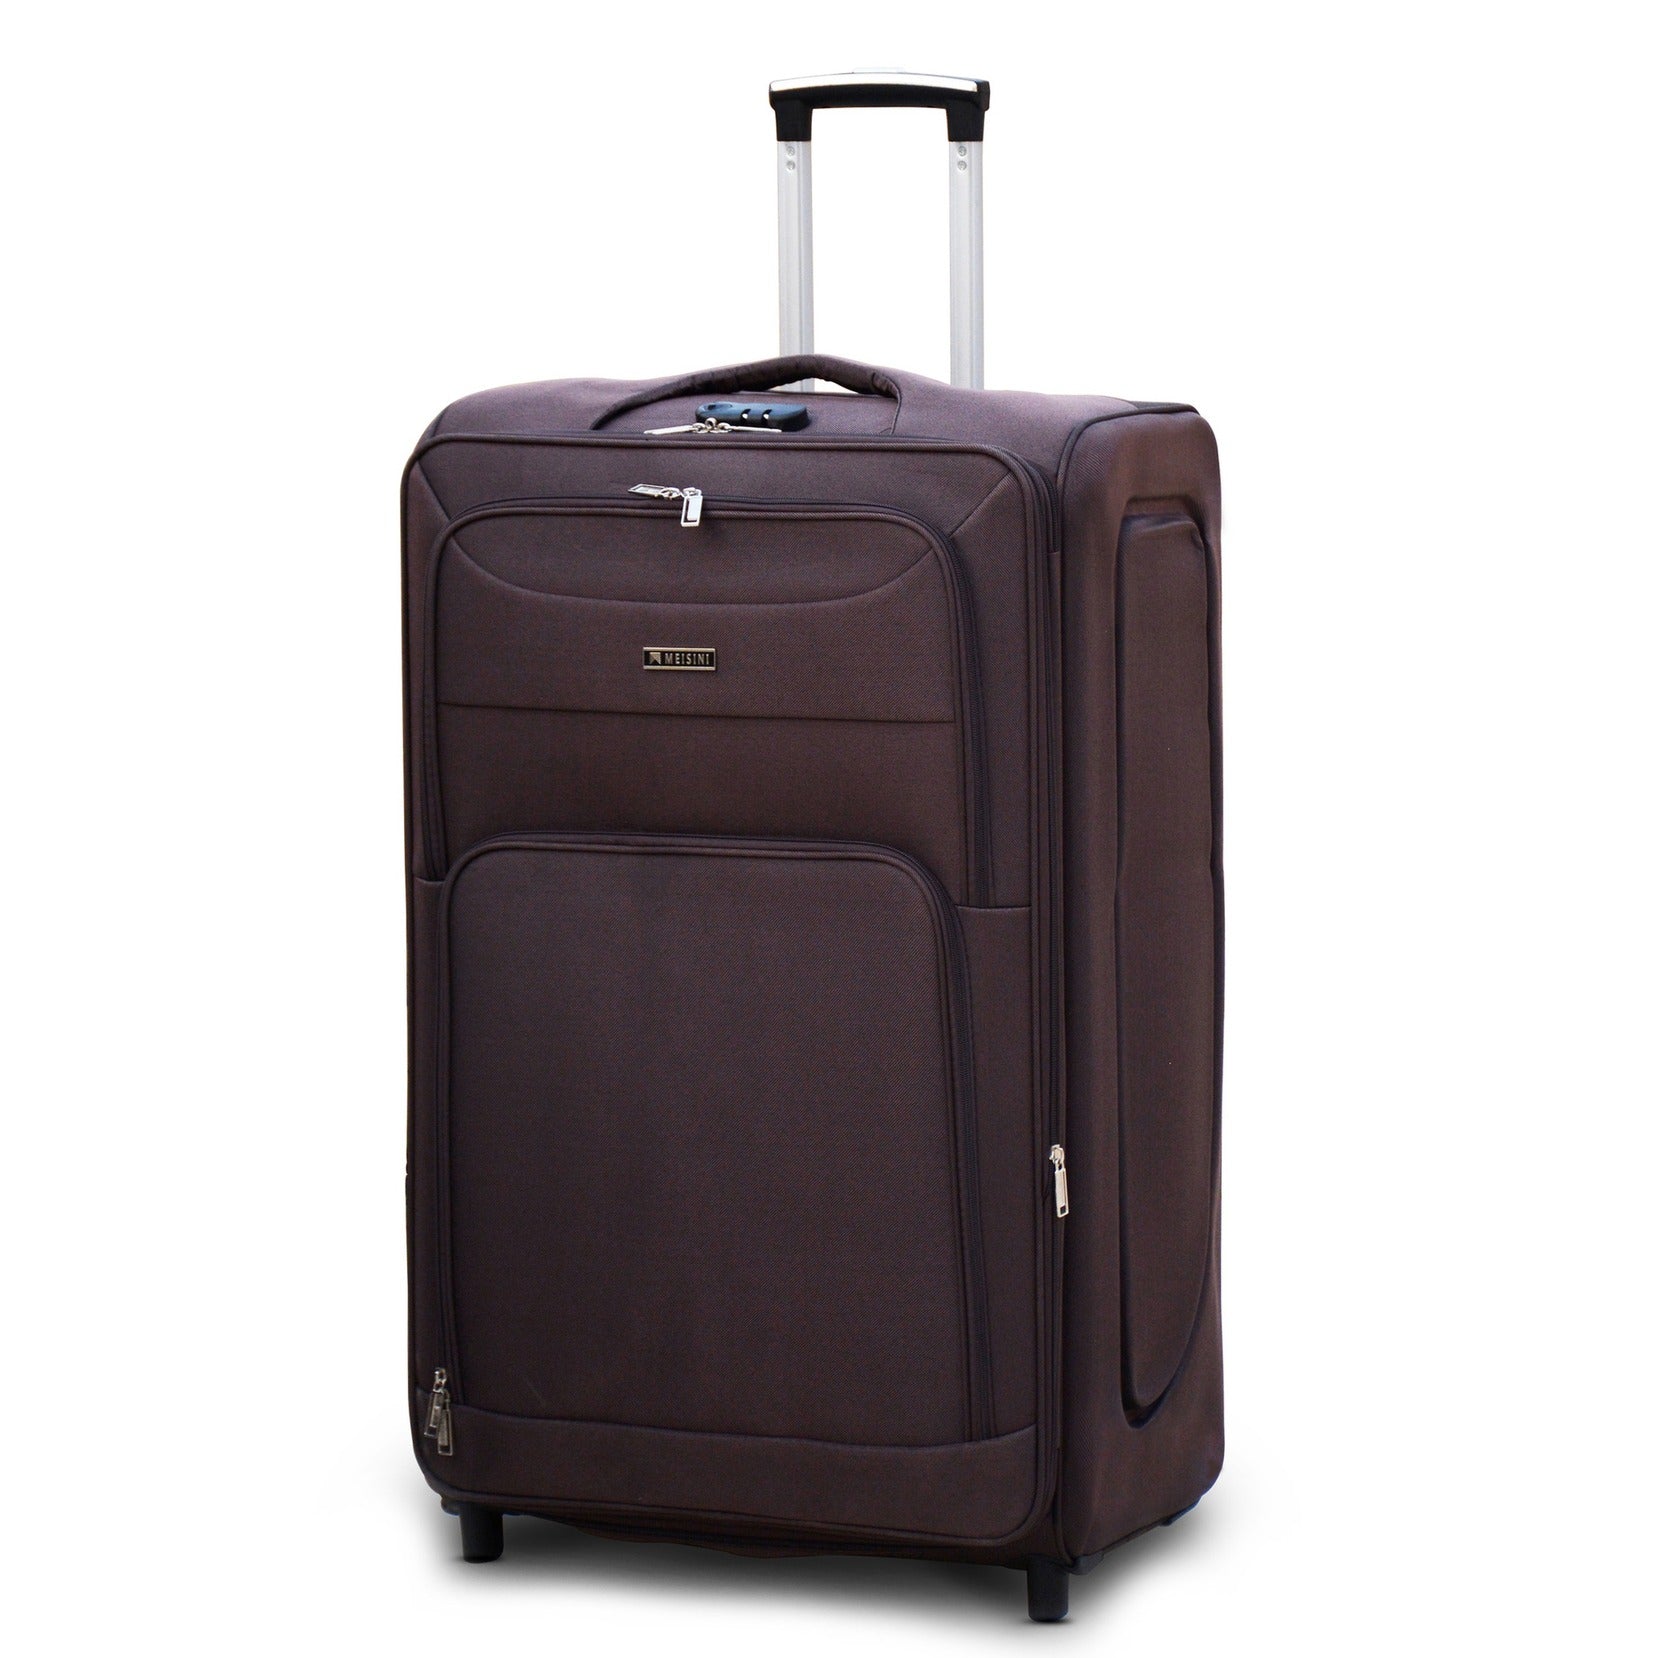 32" Coffee Colour LP 2 Wheel 0161 Luggage Lightweight Soft Material Trolley Bag Zaappy.com